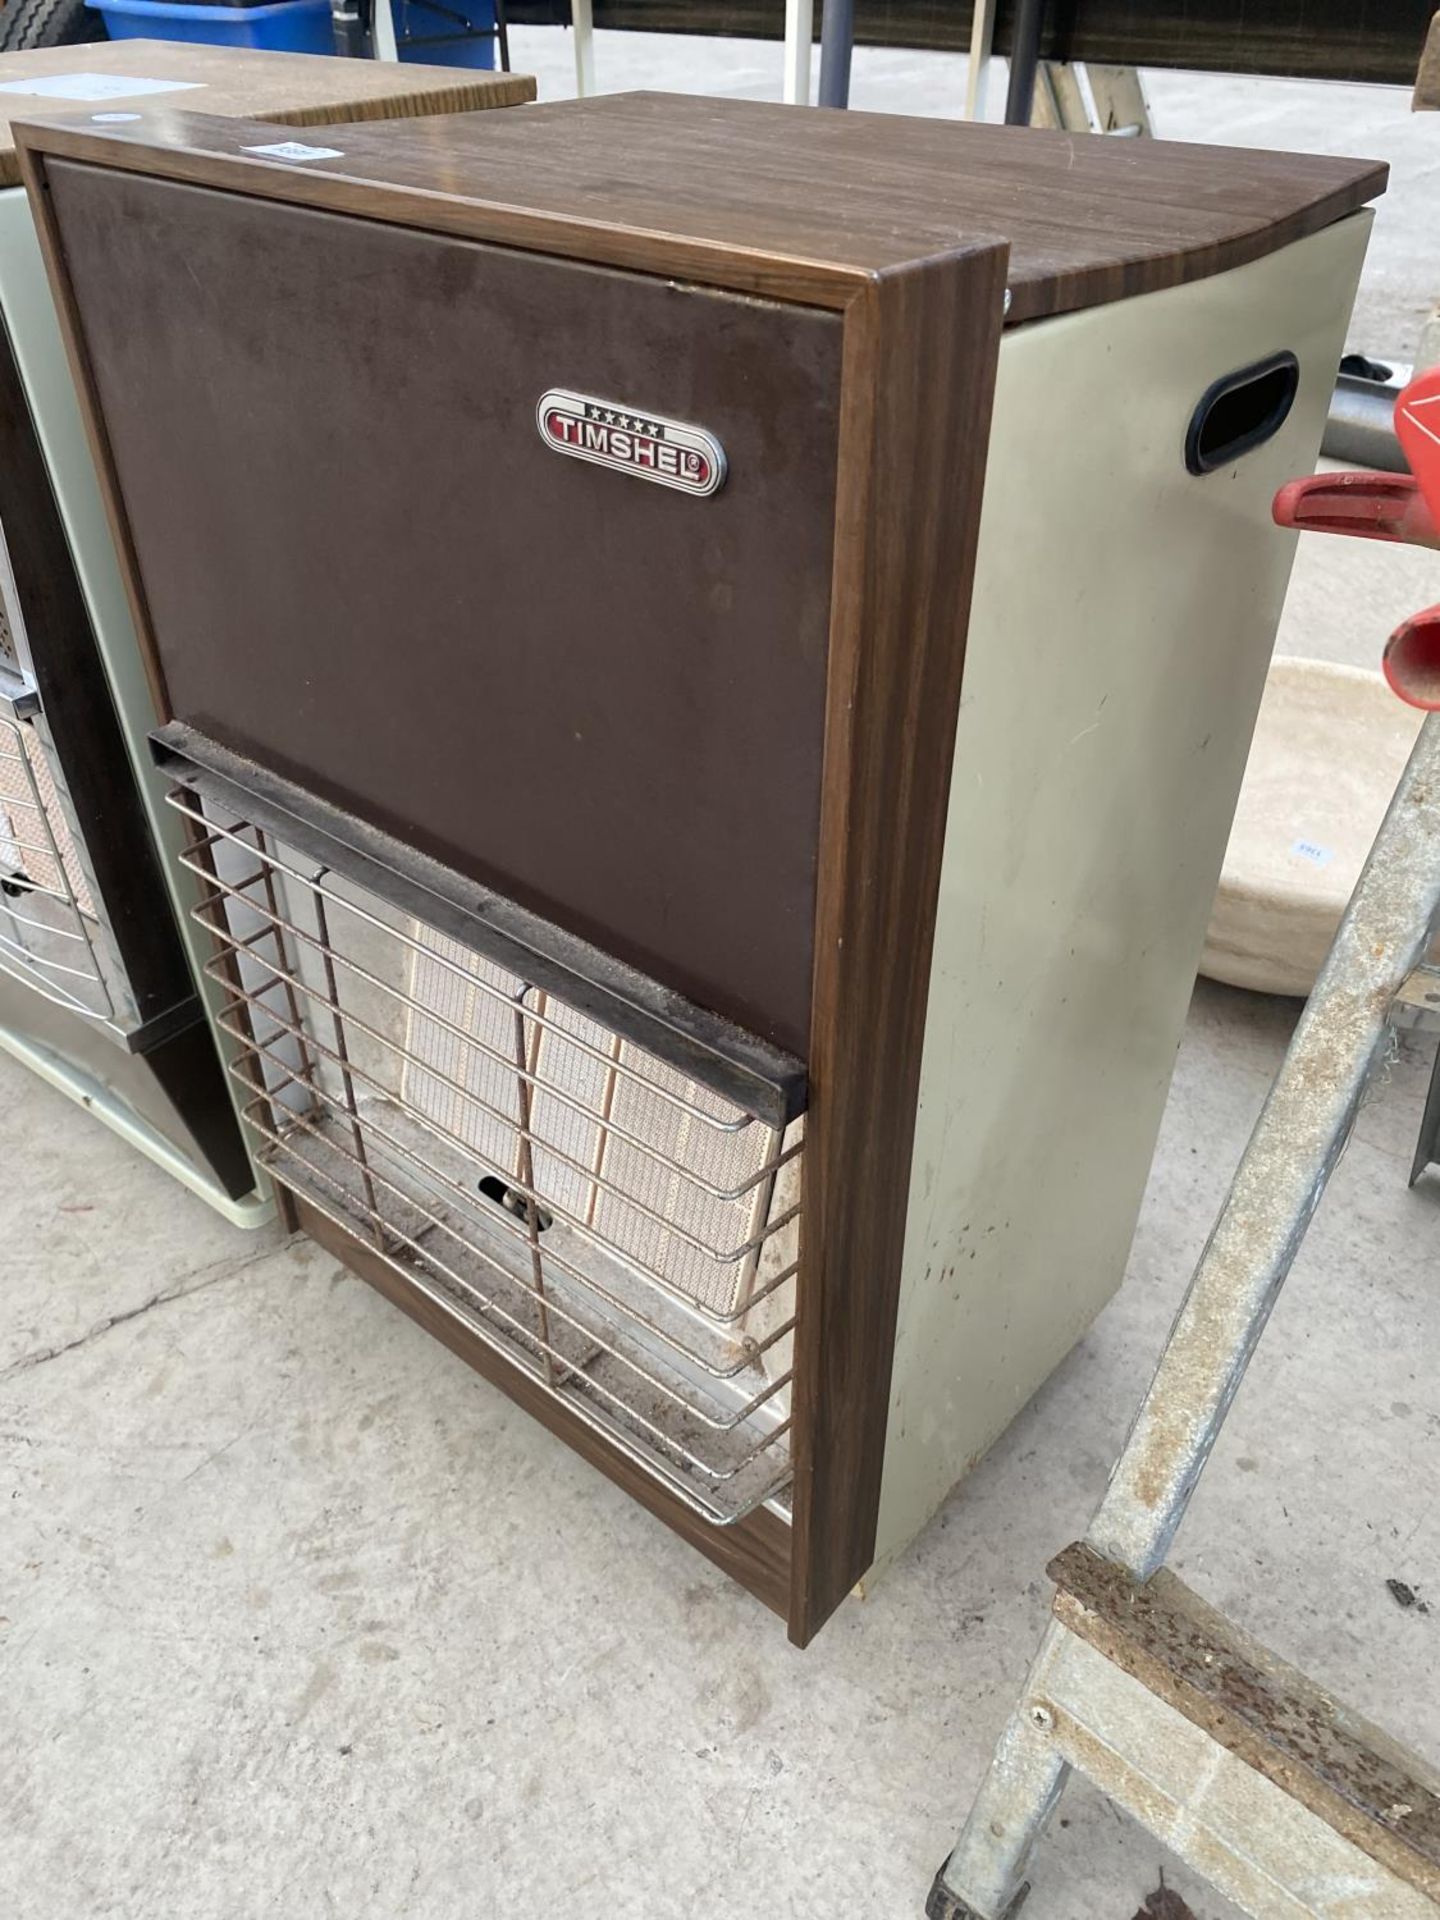 A TIMSHEL GAS HEATER - Image 2 of 2